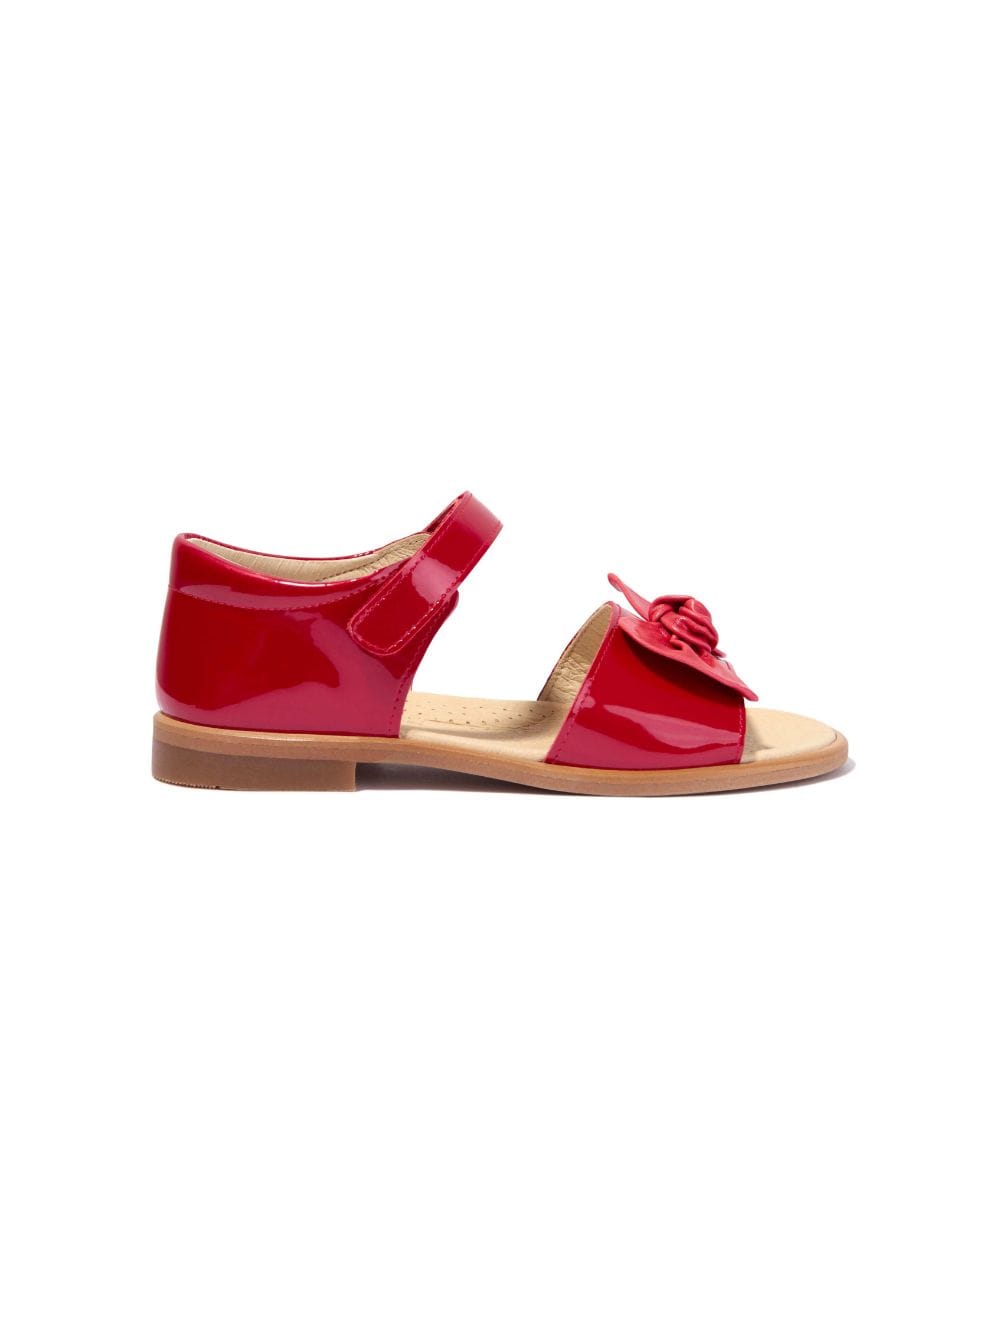 ANDANINES bow-detail leather sandals - Red von ANDANINES